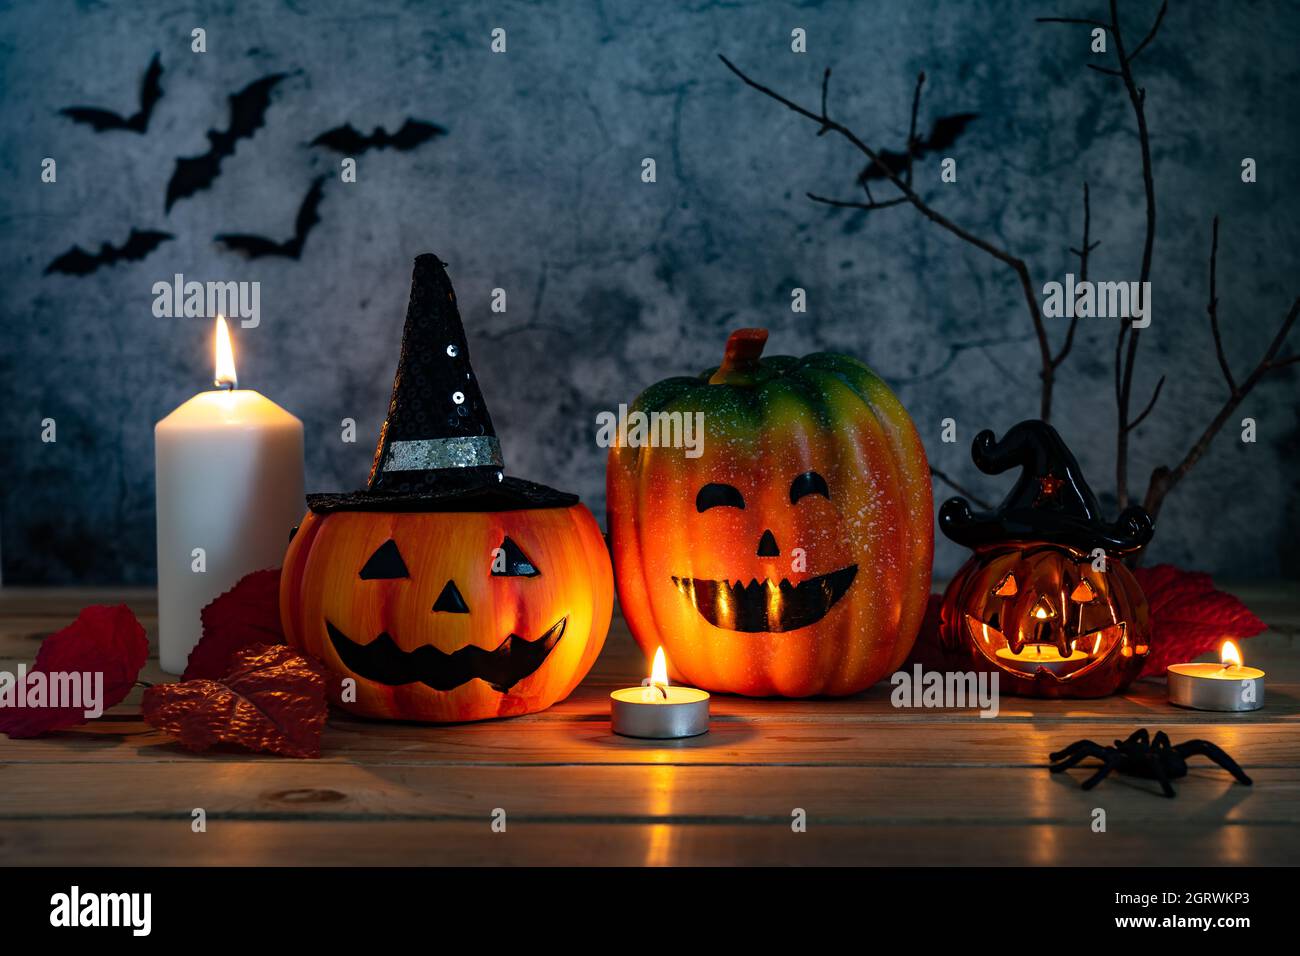 Close-up Of Halloween Decorations On Table Against Wall Stock Photo - Alamy